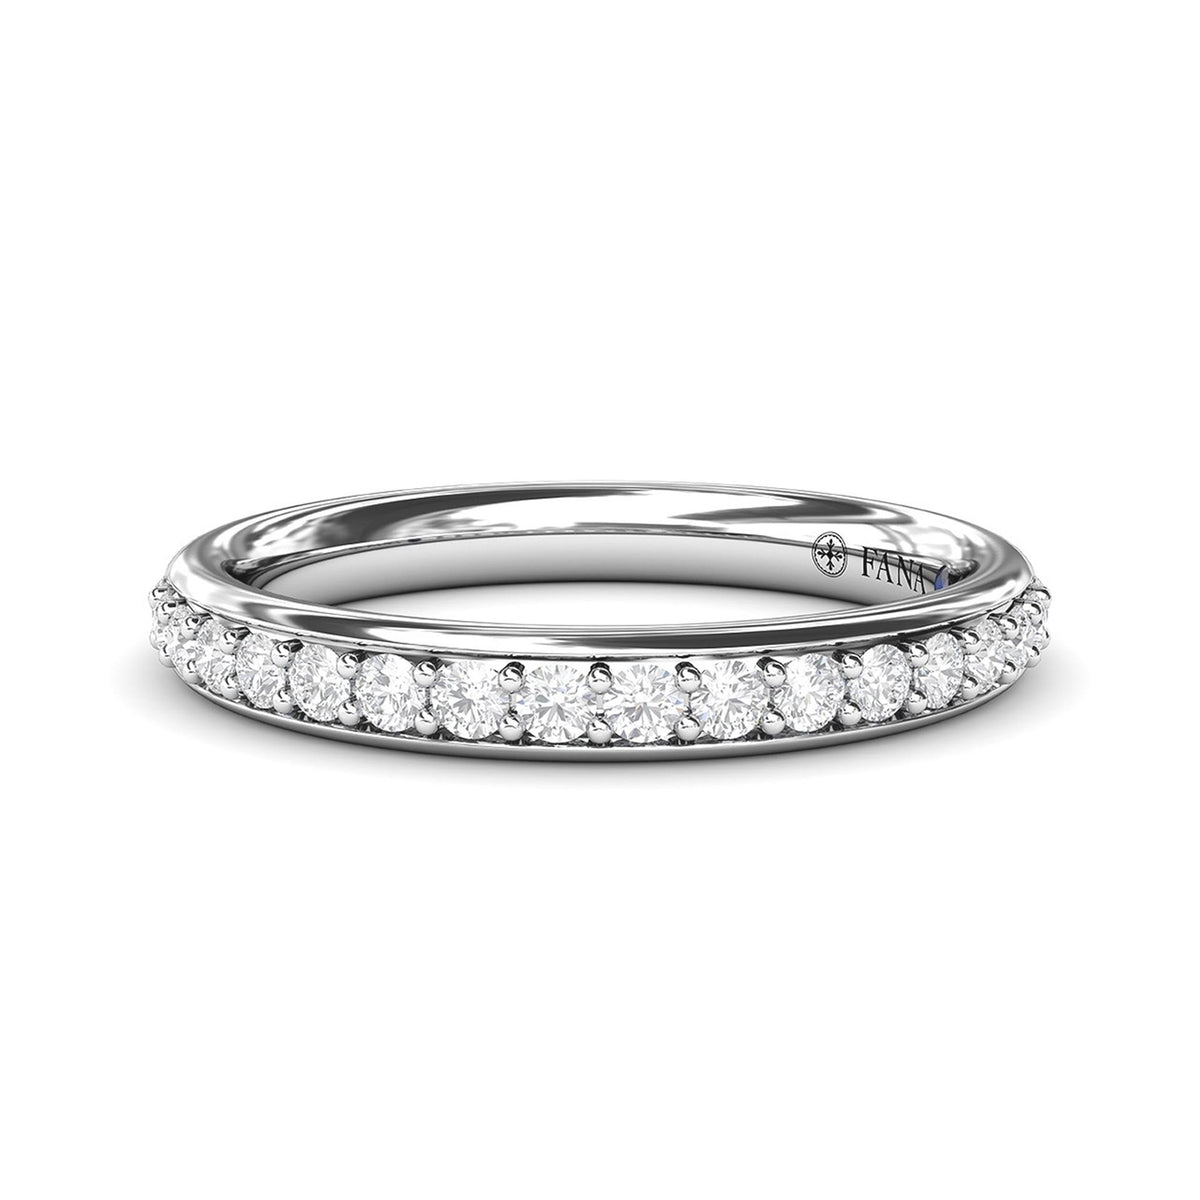 14Kt White Gold Channel Set Wedding Ring With 0.32cttw Natural Diamonds